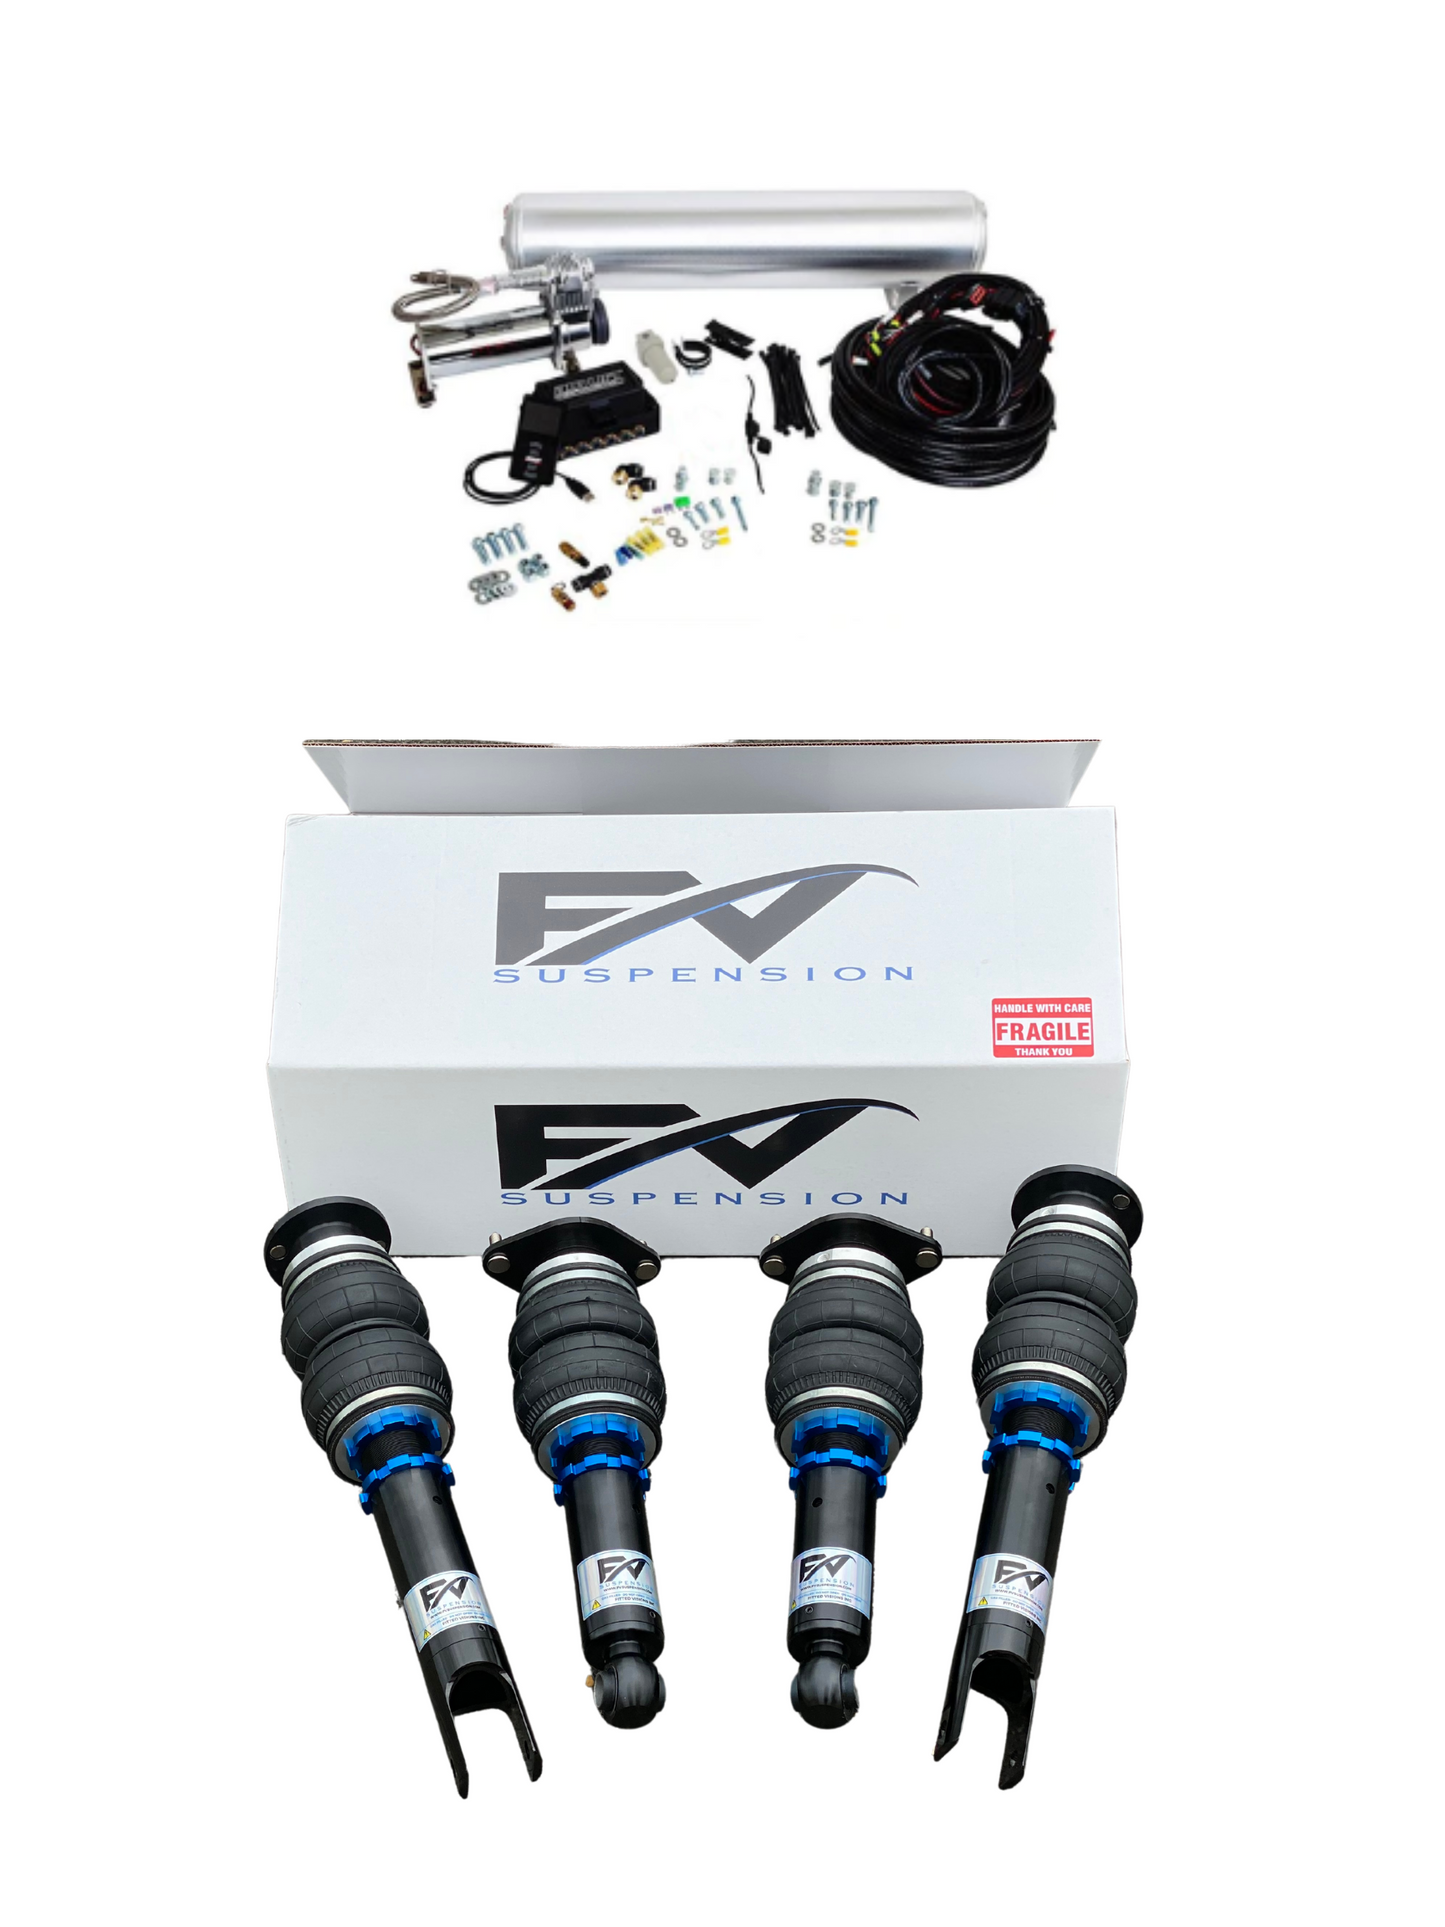 FV Suspension 3P Tier 2 Complete Air Ride kit for 95-03 BMW 5 Series Wagon - FVALtier2kit97